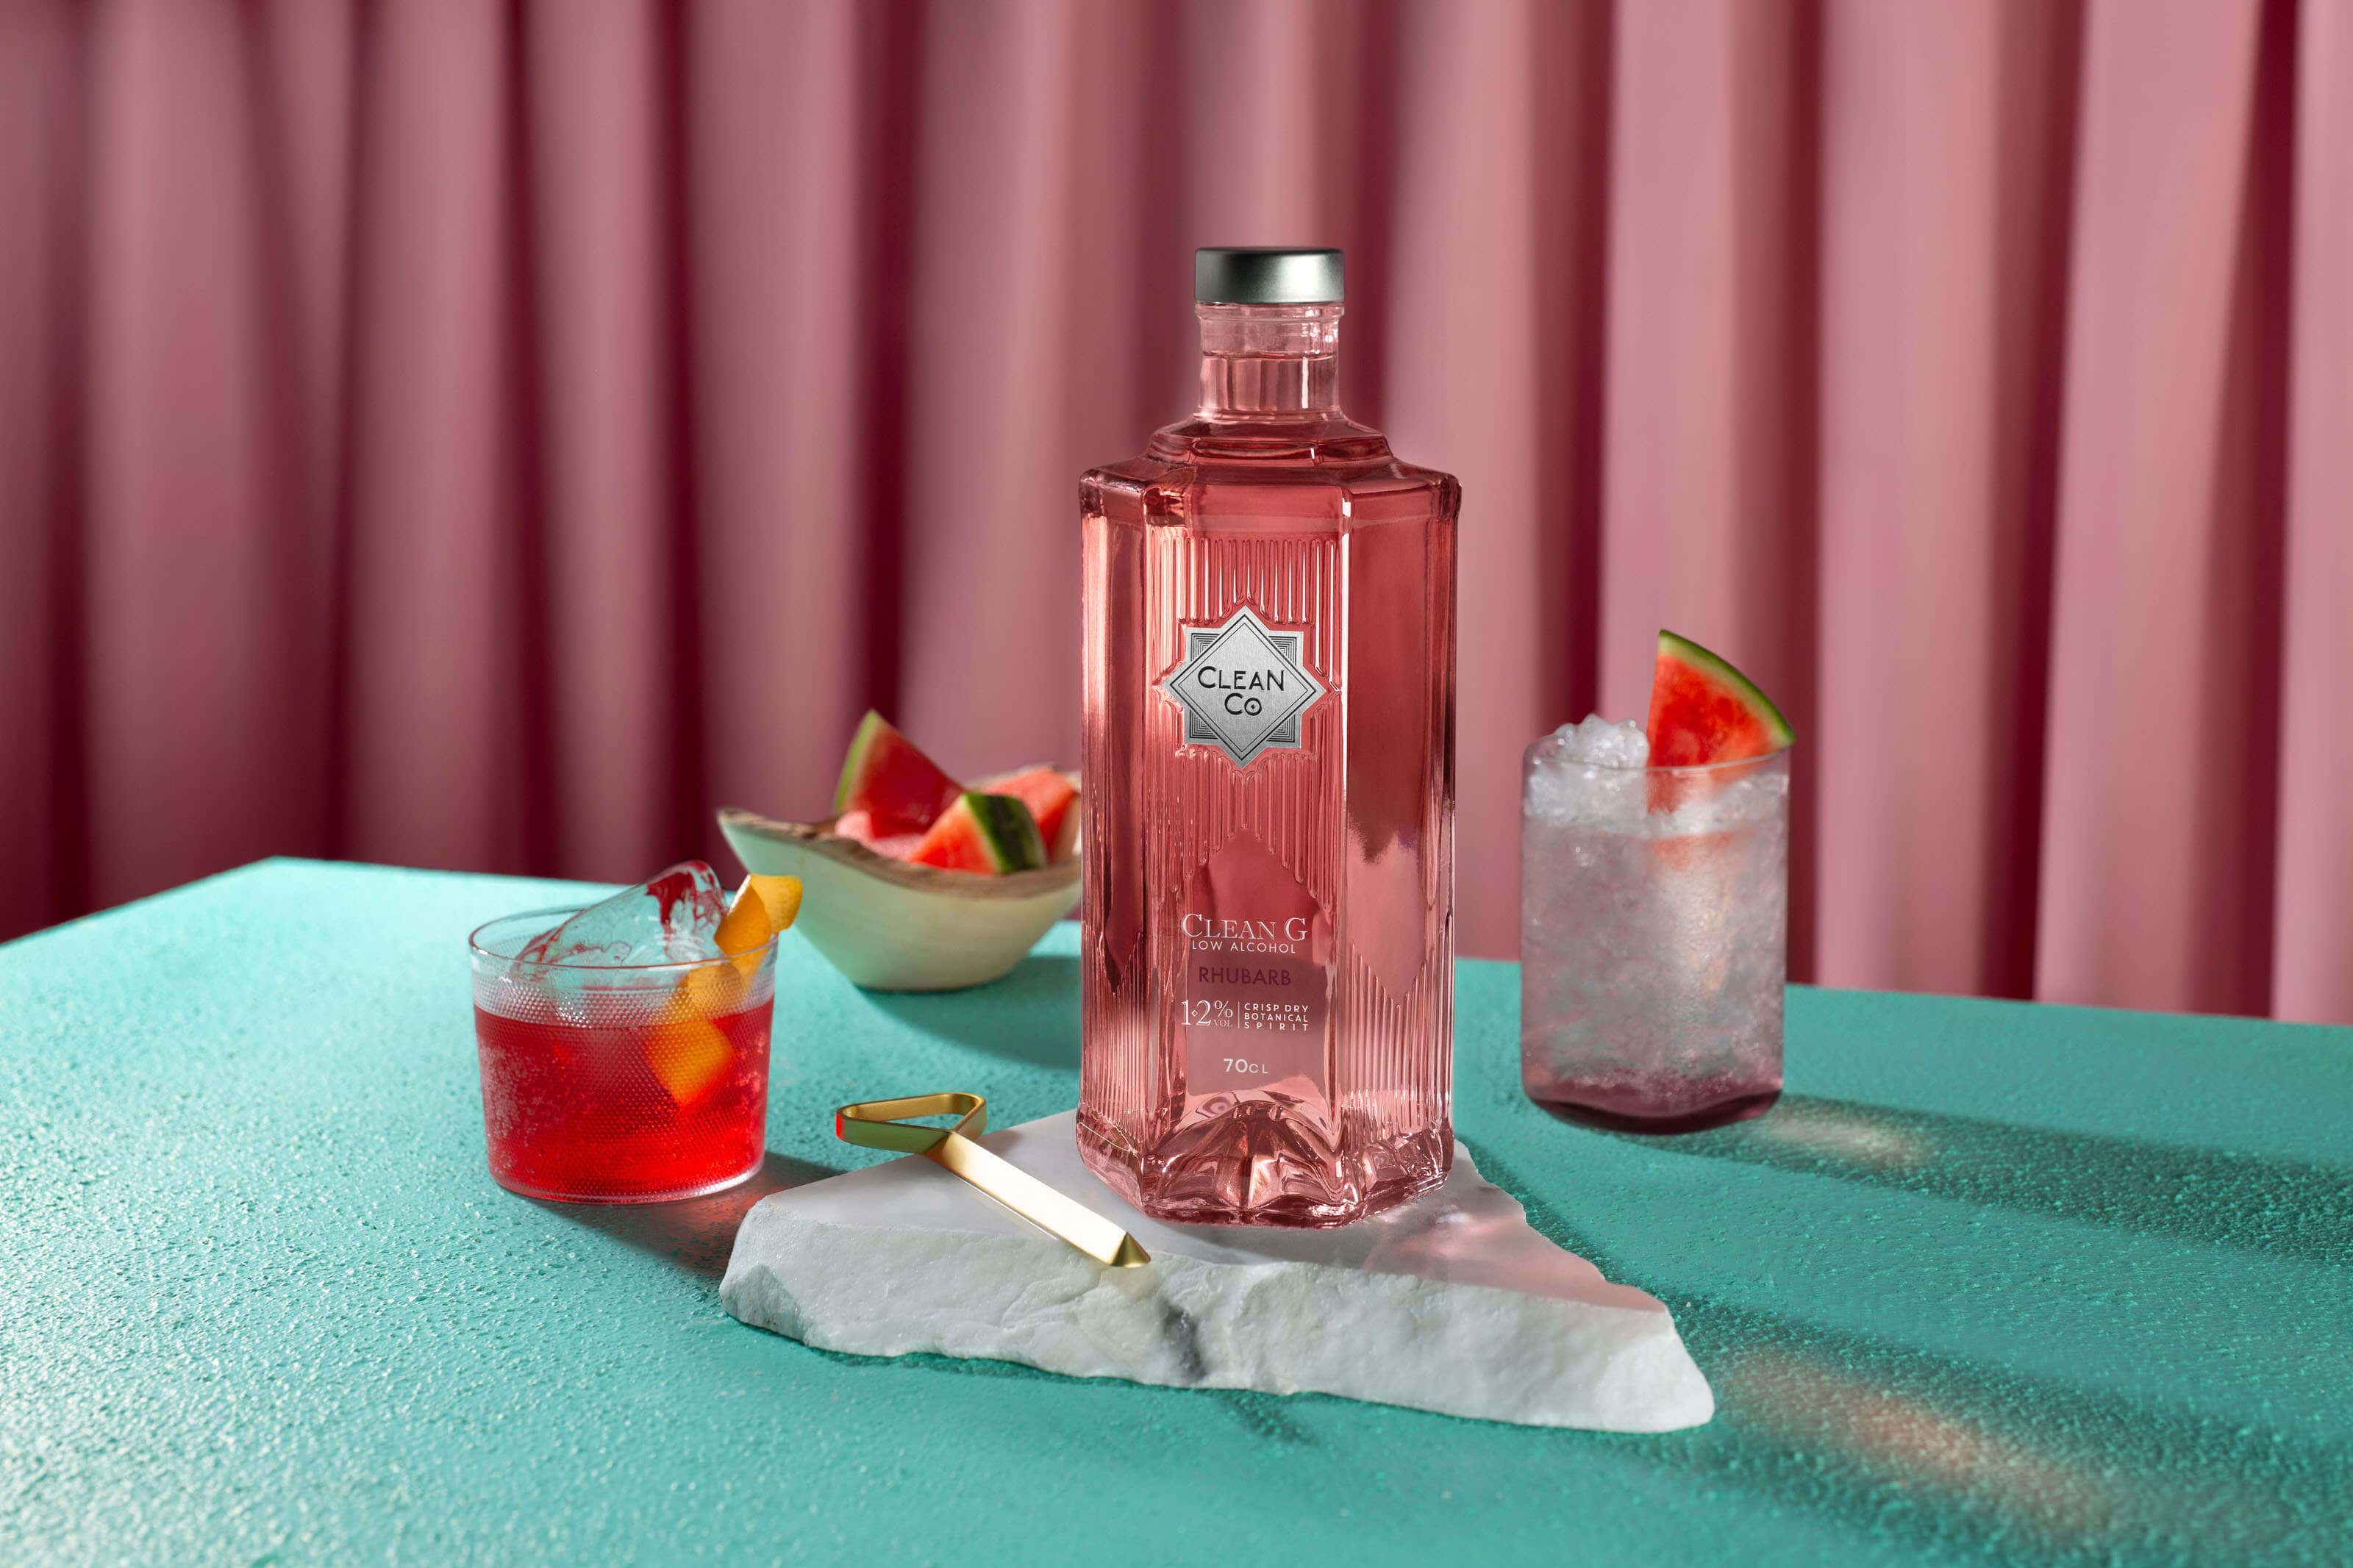 clean co rhubarb gin with watermelon cocktails